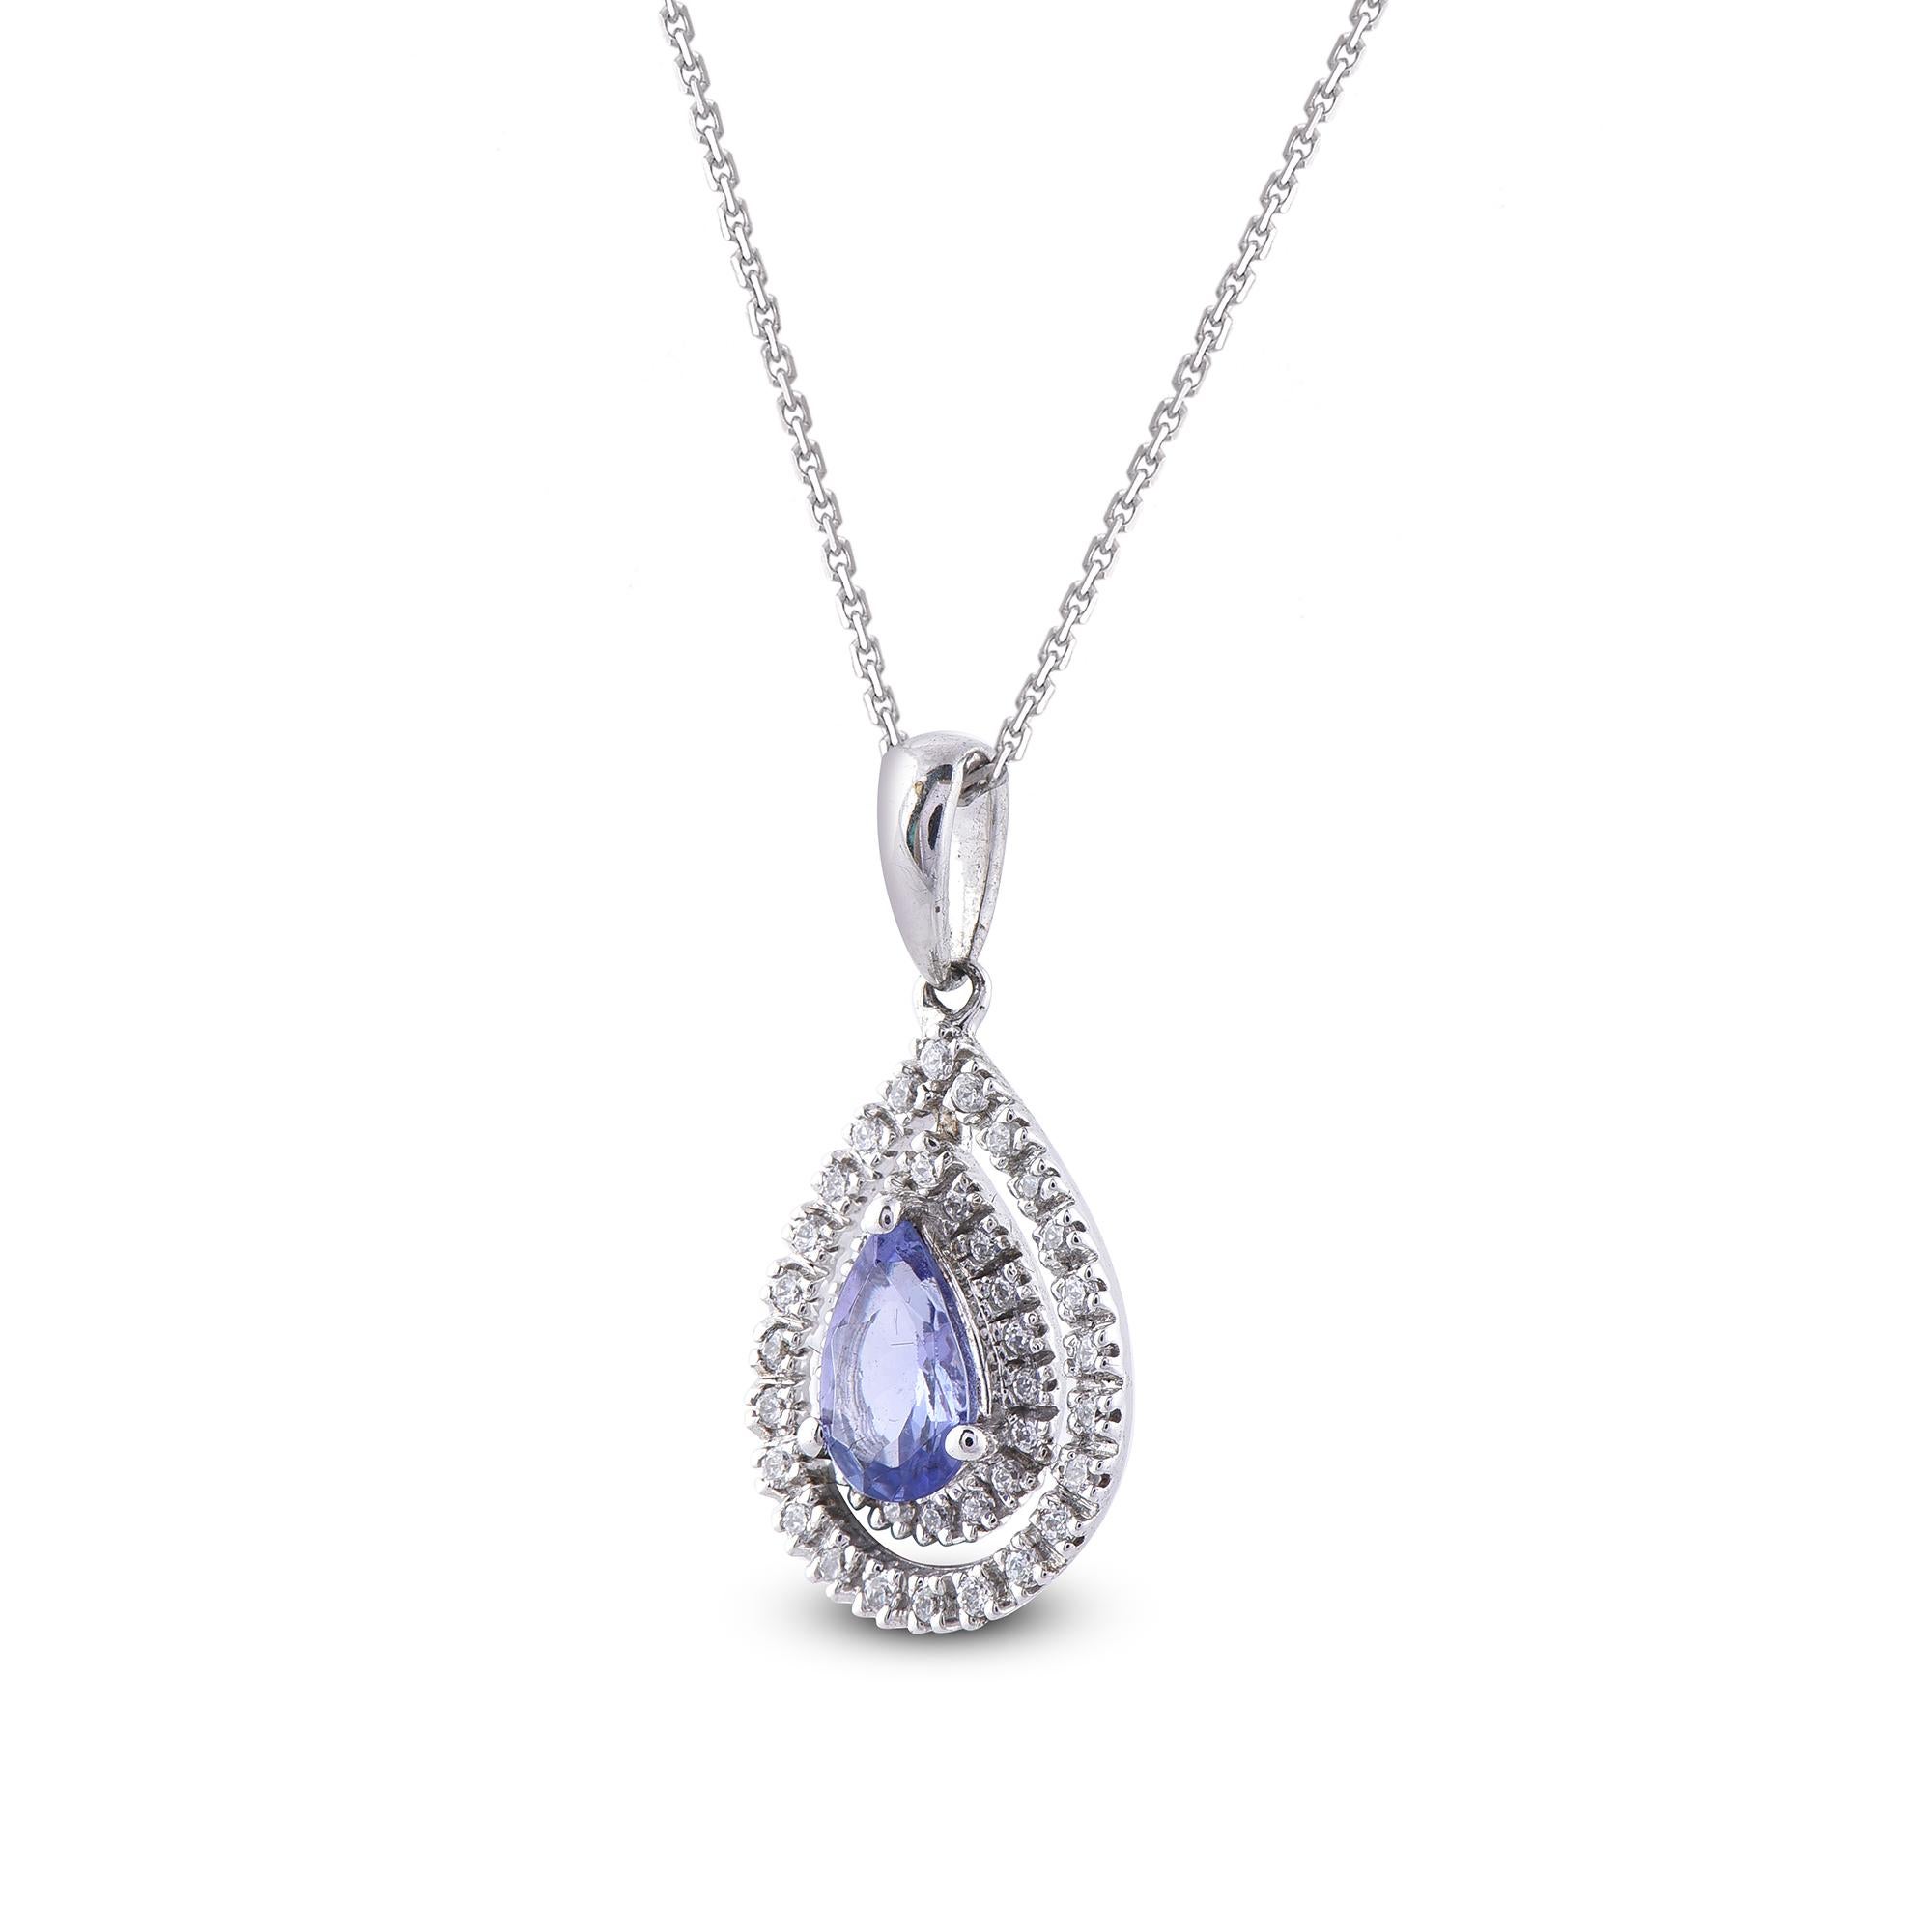 This Double pear shaped pendant is Accentuated with 52 brilliant round diamonds and 1 tanzanite beautifully set in prong and micro-prong setting. The total diamond weight is 0.15 Carat and H-I color I2 Clarity
